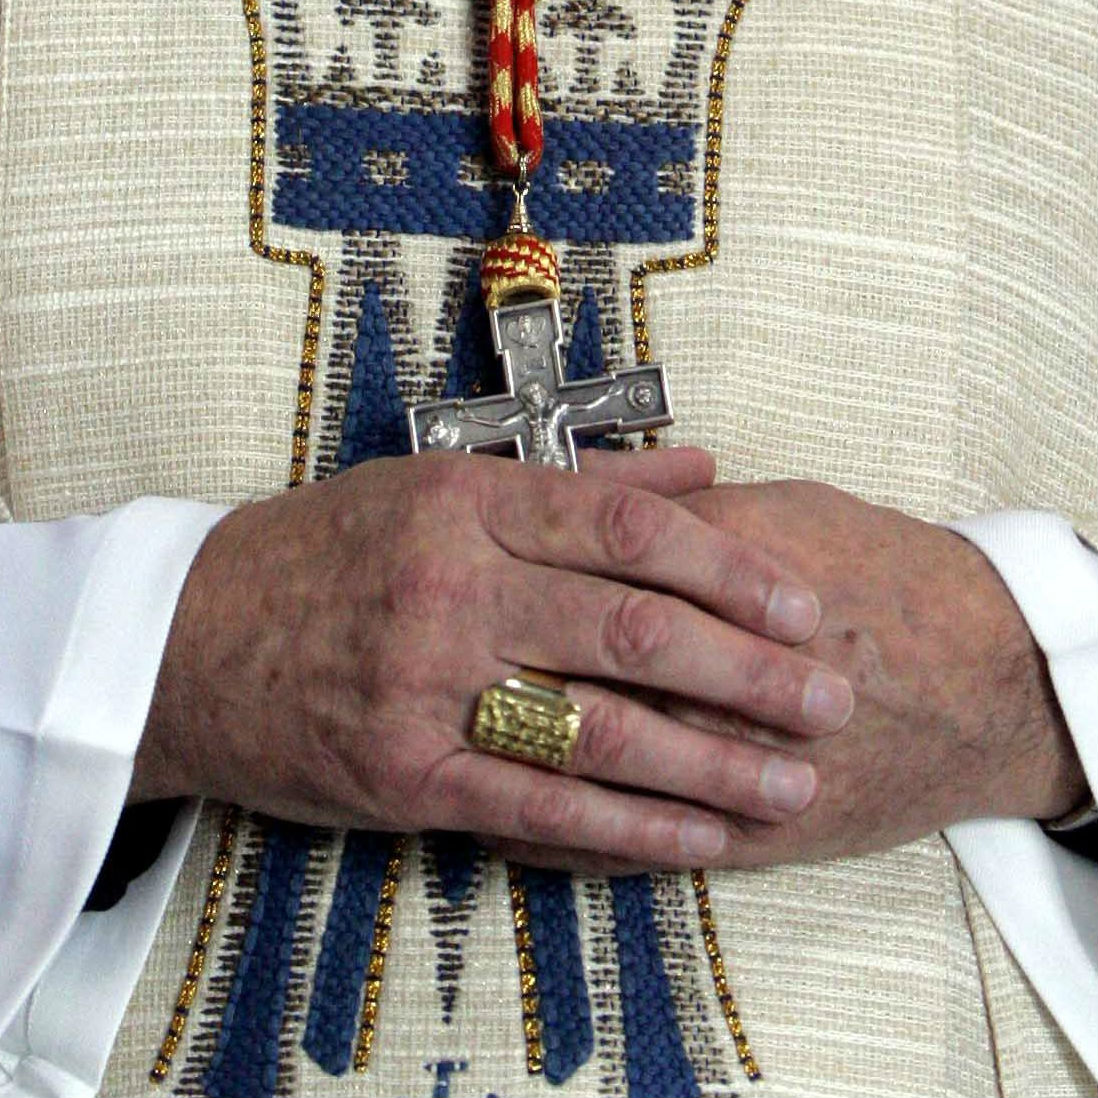 Clericalism is a 'virus that has infected the church', Australian abuse panel told 